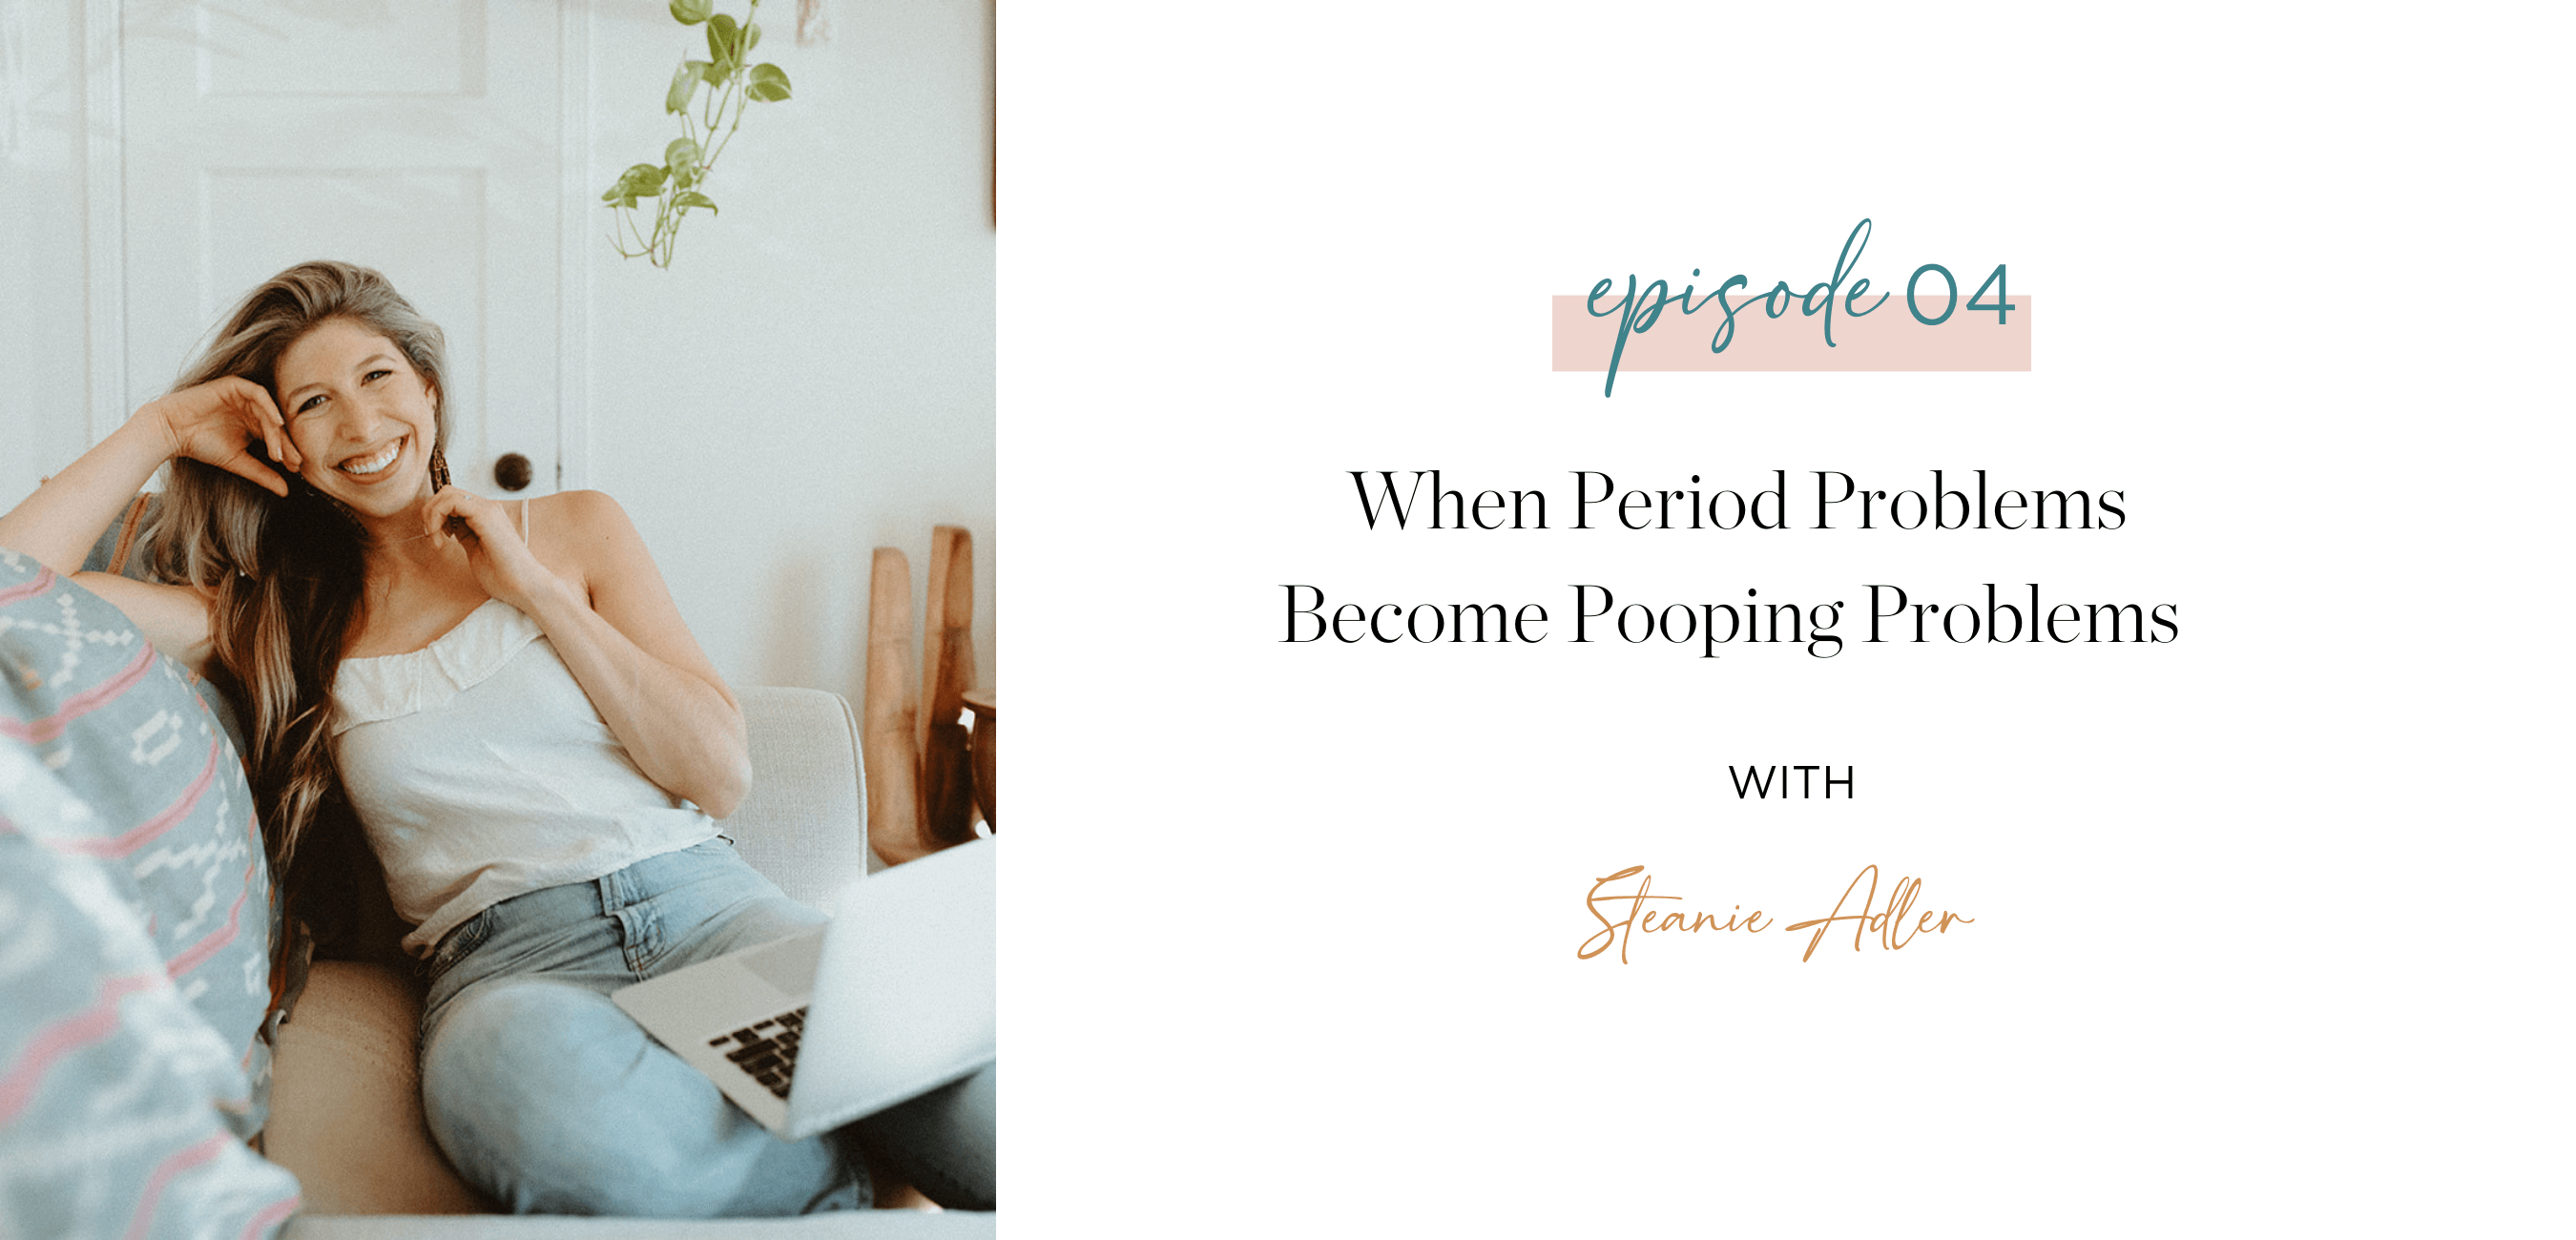 Episode 4 When Period Problems Become Pooping Problems with Stefanie Adler